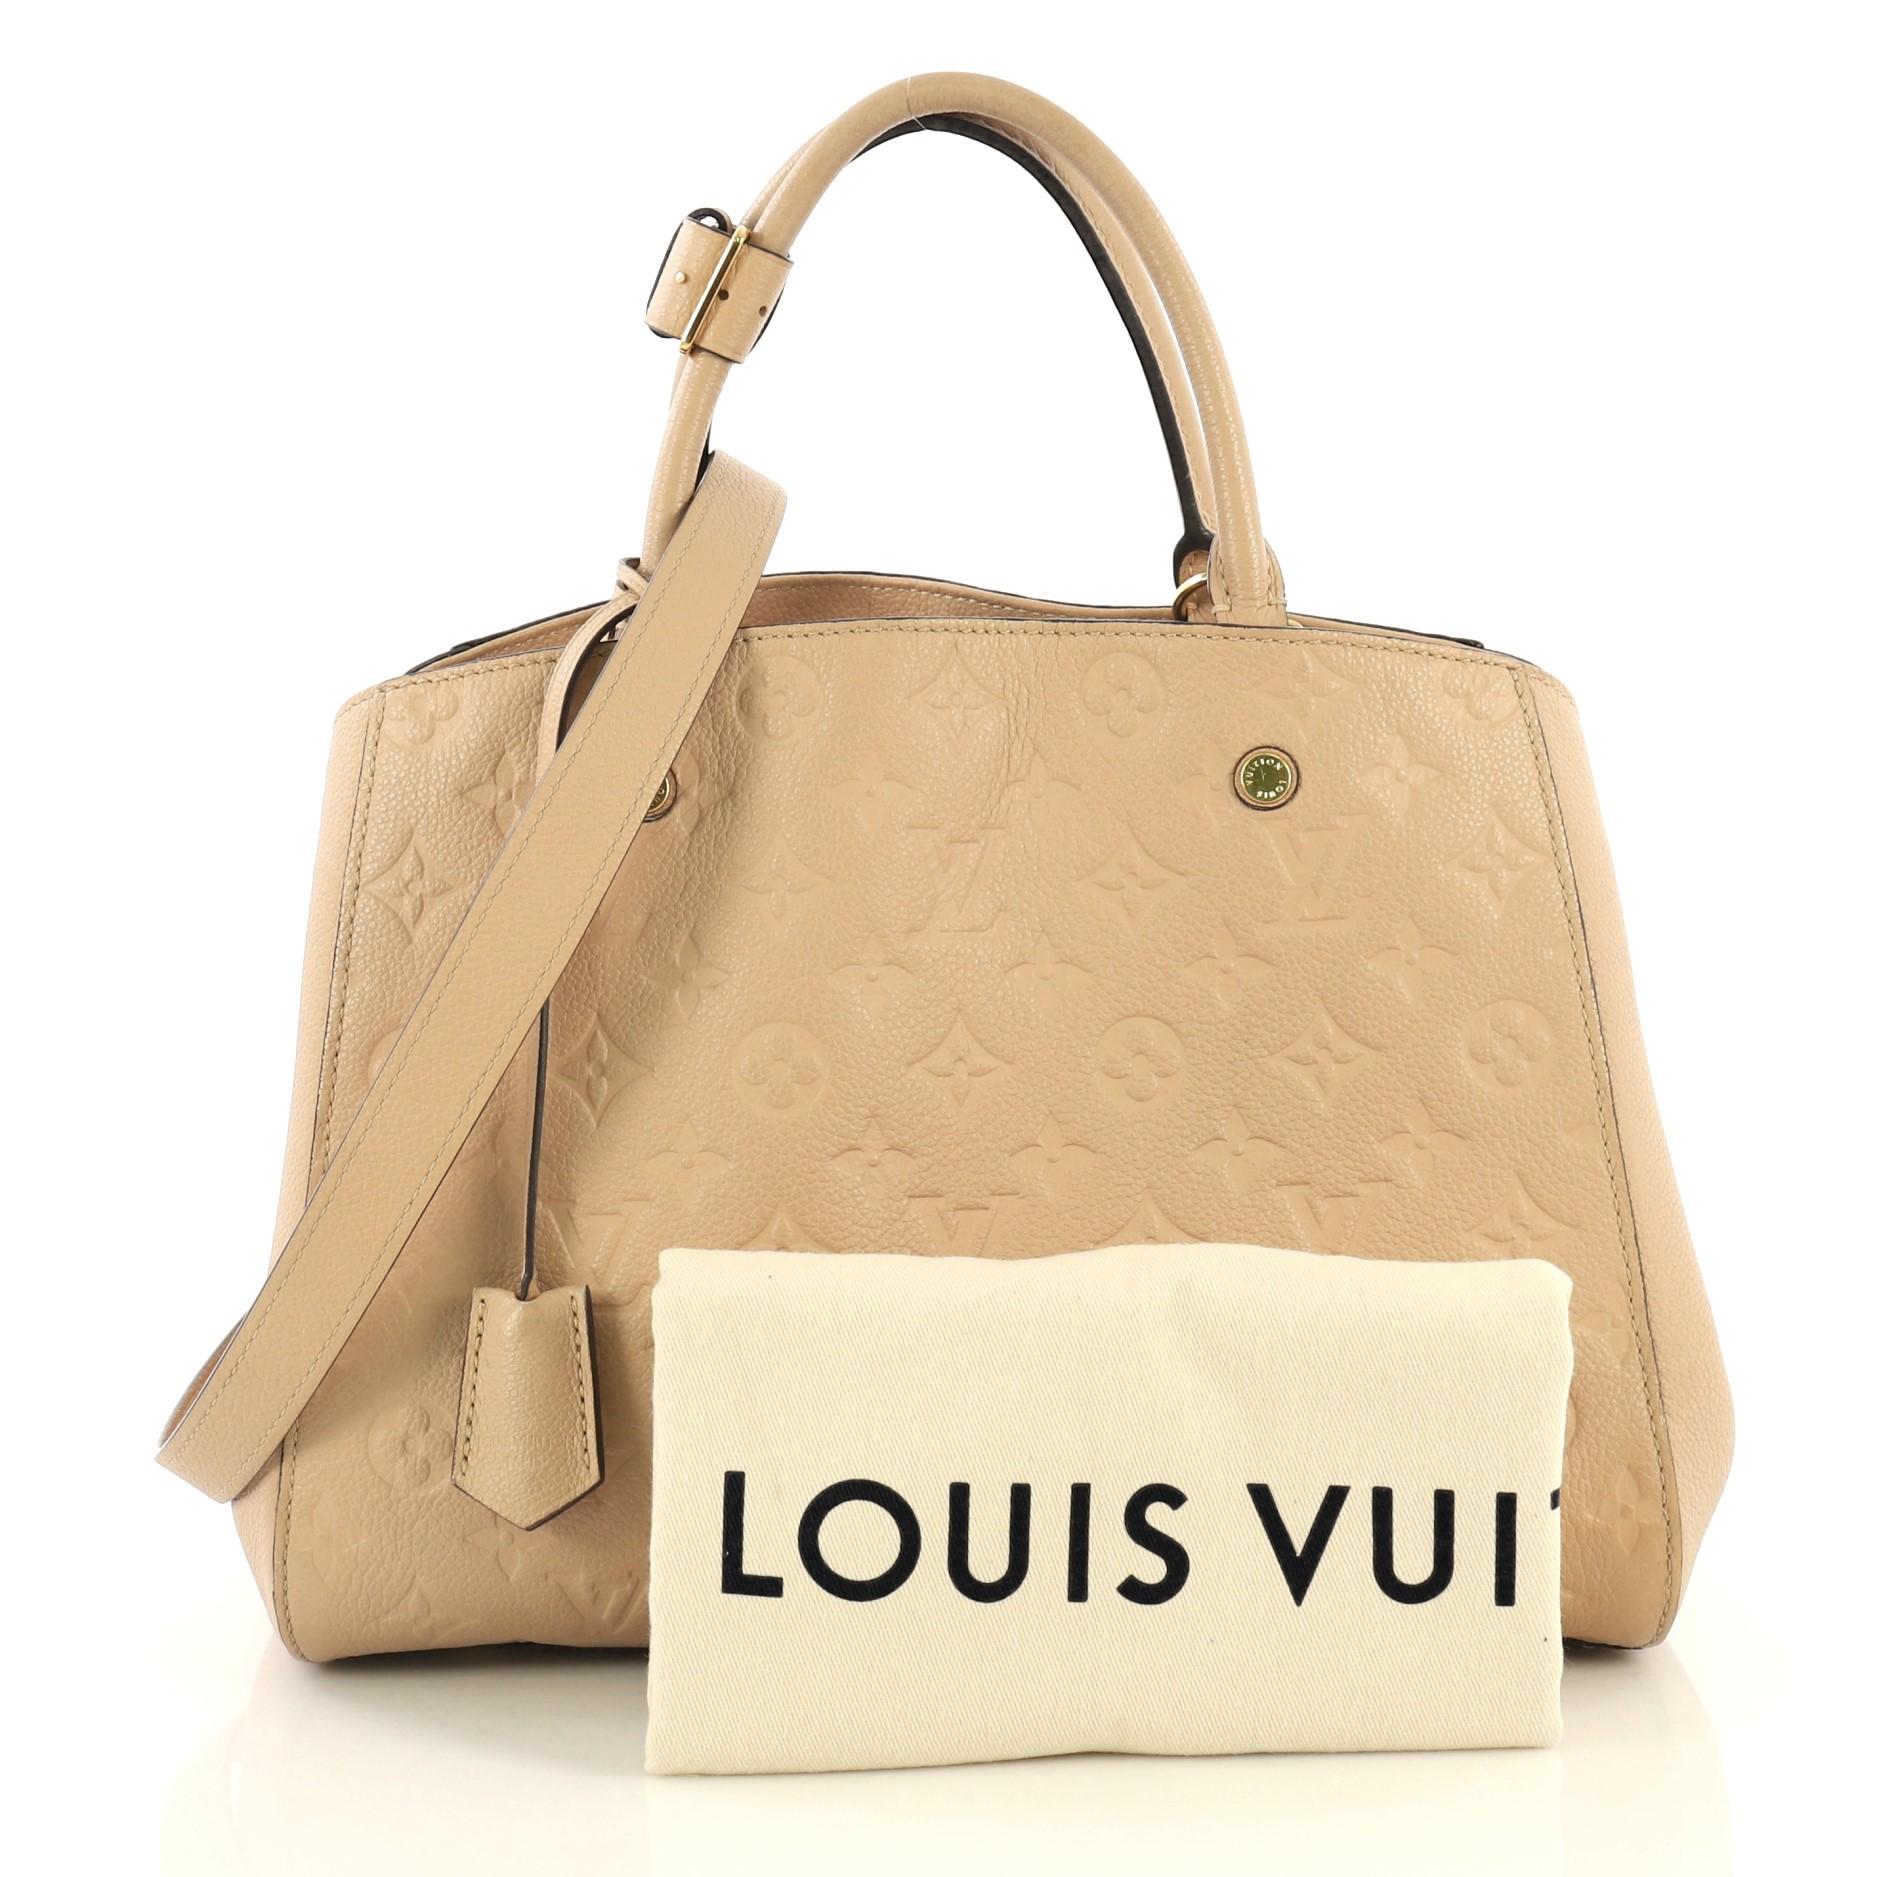 This Louis Vuitton Montaigne Handbag Monogram Empreinte Leather MM, crafted in neutral monogram empreinte leather, features dual rolled leather handles, protective base studs, and gold-tone hardware. Its hook closure opens to a neutral fabric